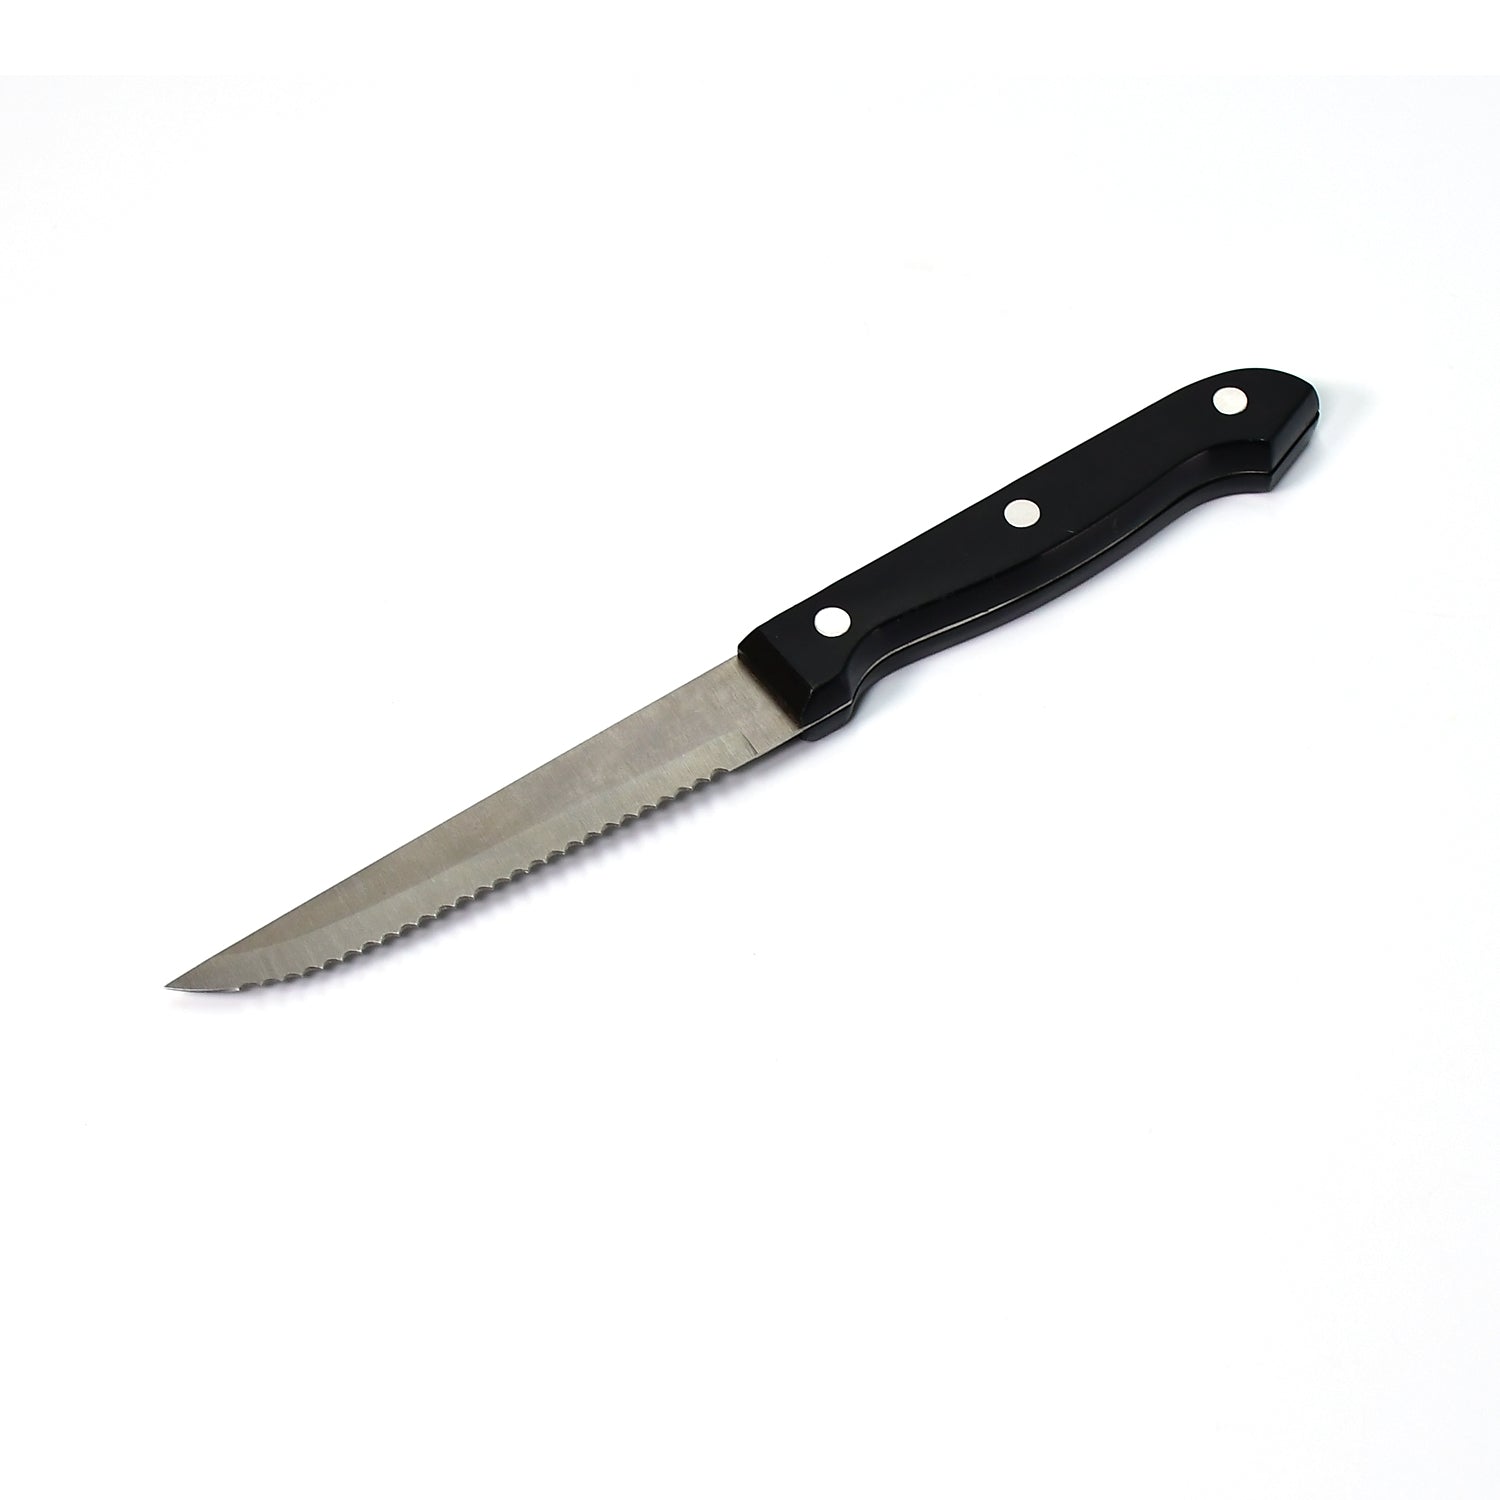 2130 Stainless Steel Steak and Kitchen Knife with easy grip Handle (23cm) DeoDap